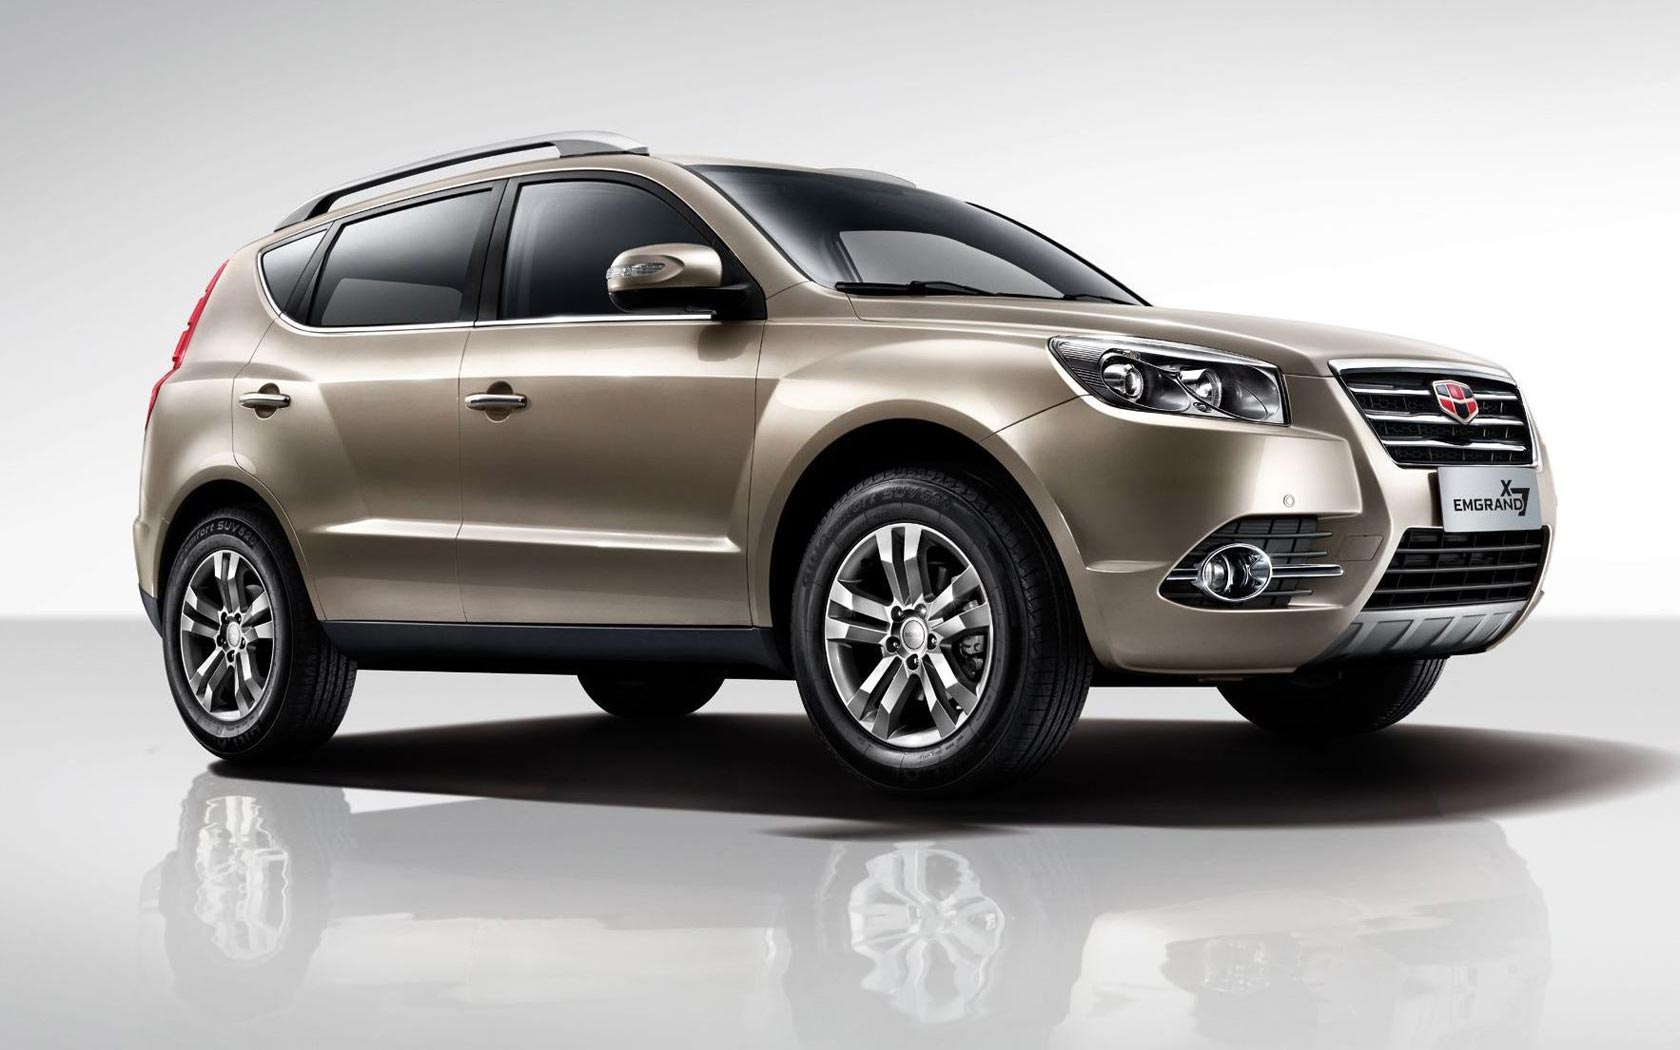  Geely Emgrand X7 (2016-2018)